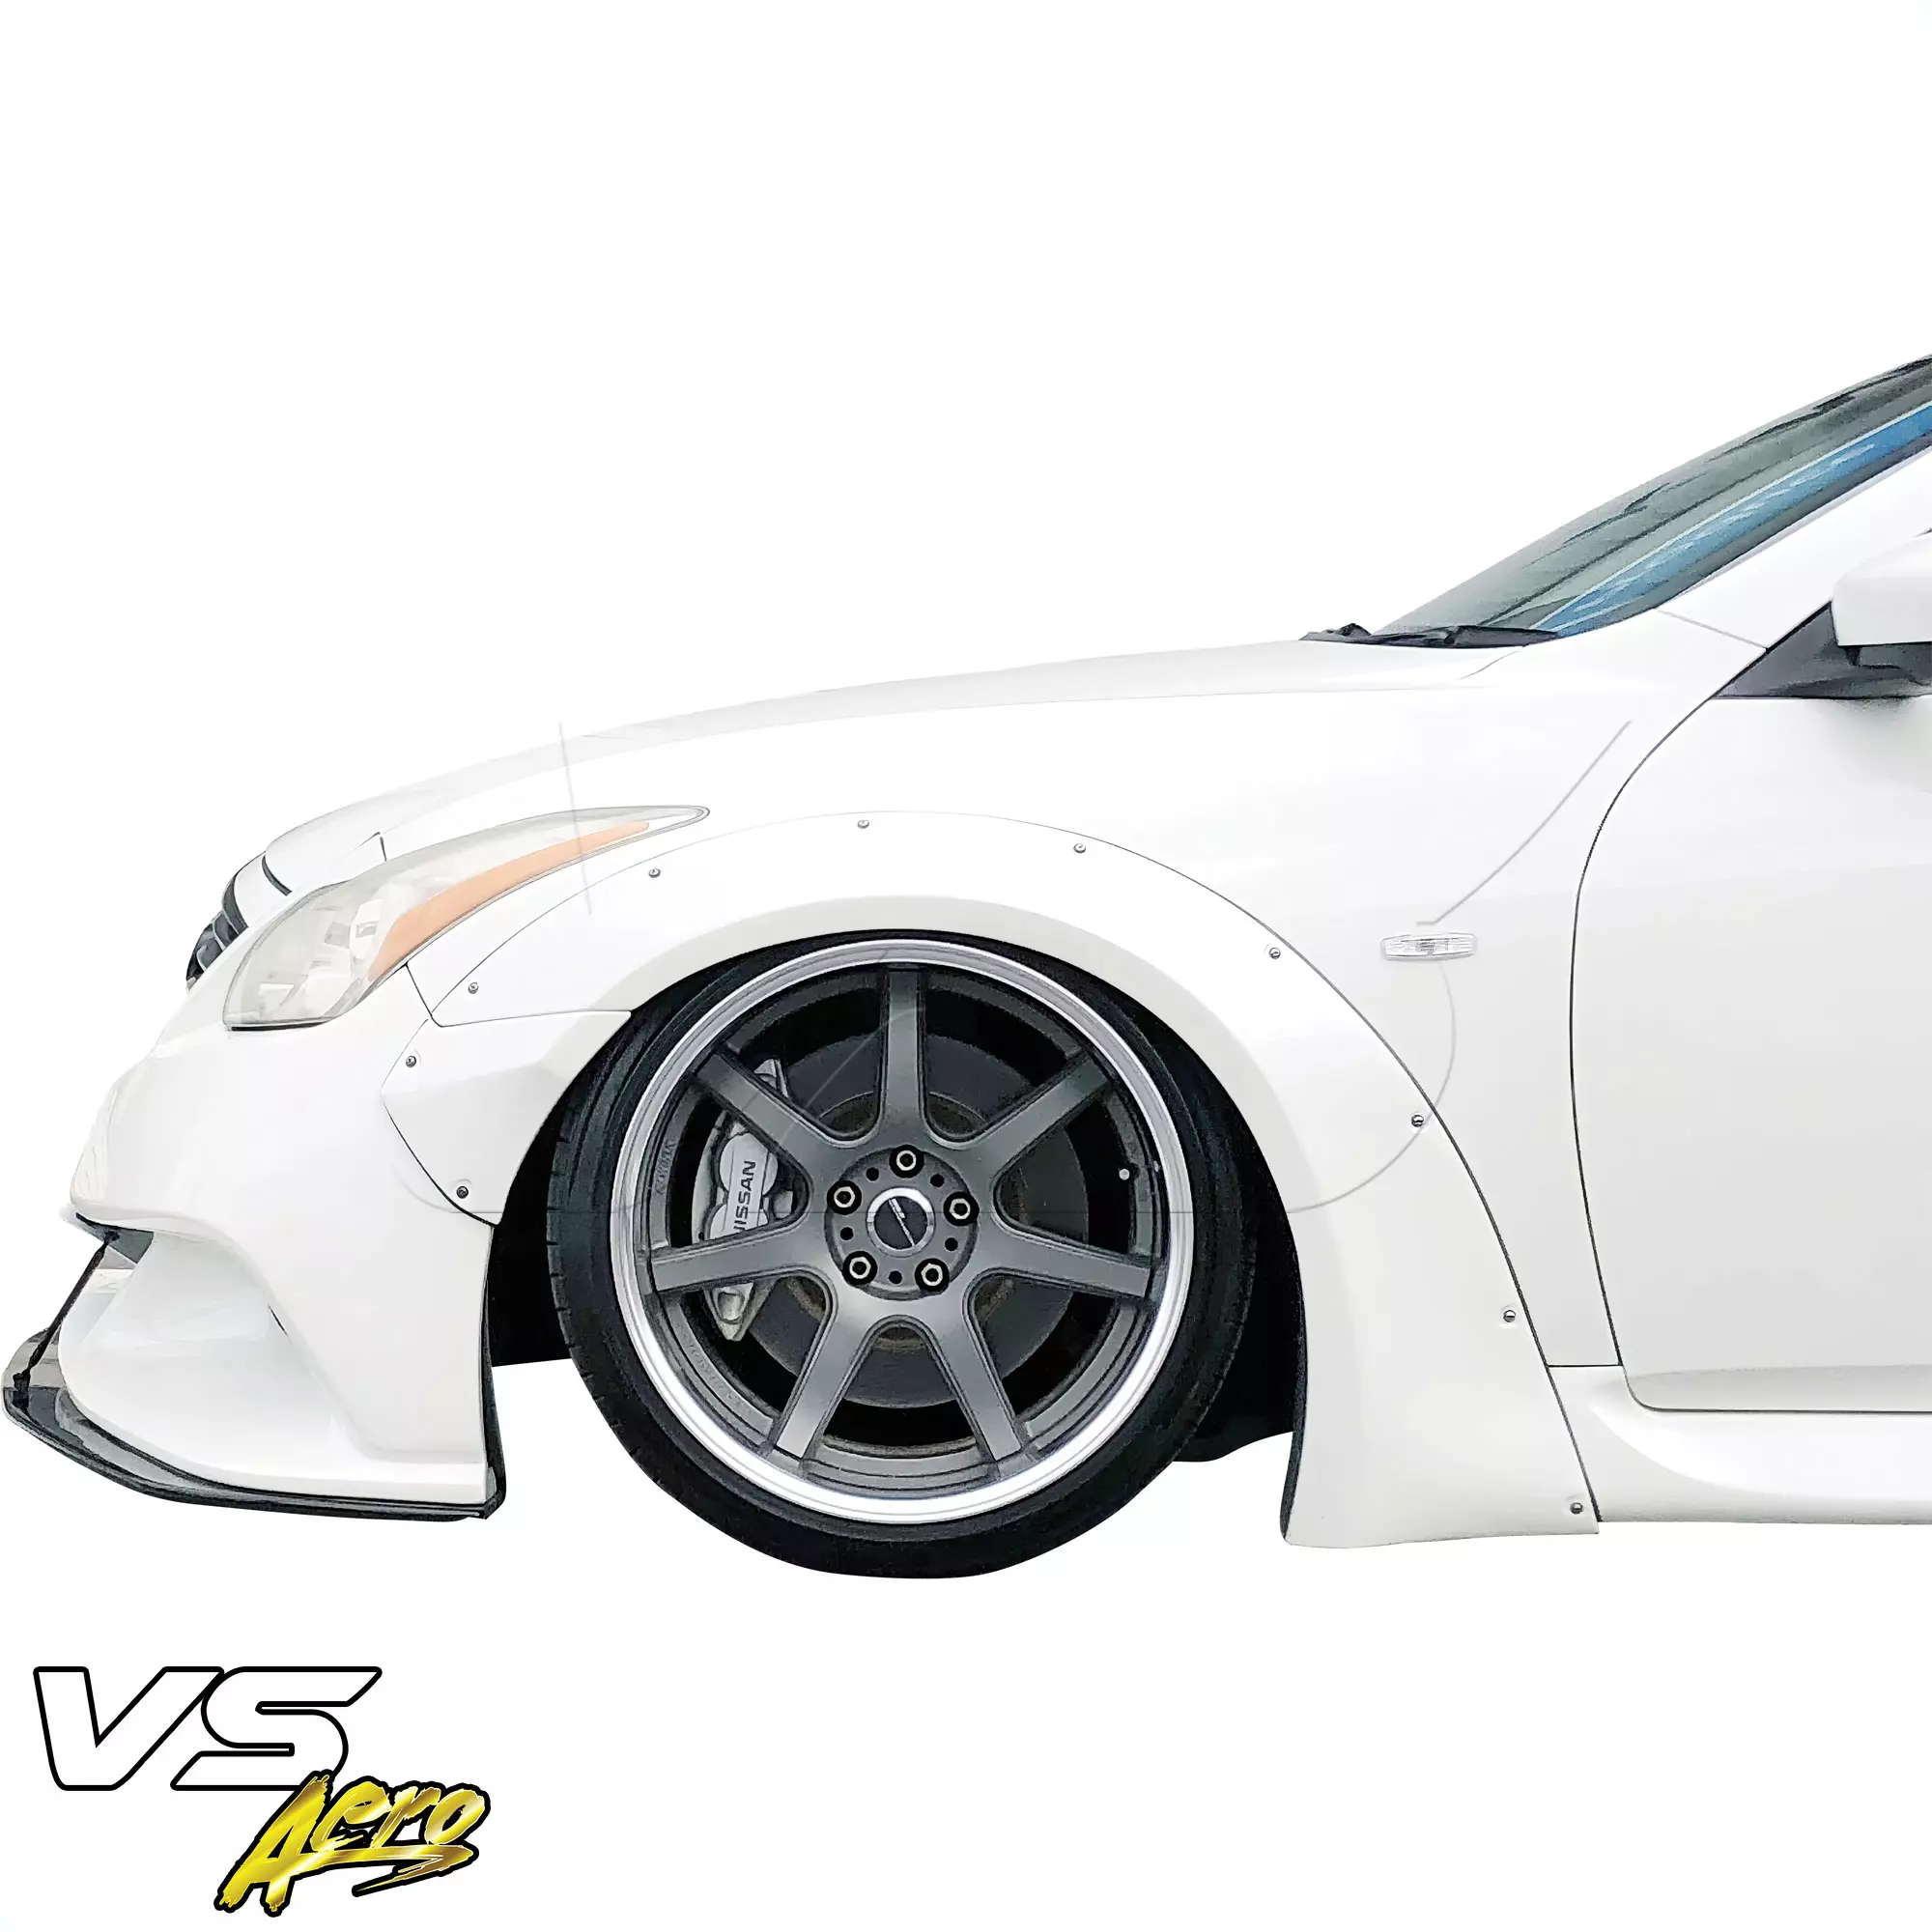 VSaero FRP LBPE Wide Body Fender Flares (front) 4pc > Infiniti G37 Coupe 2008-2015 > 2dr Coupe - Image 1